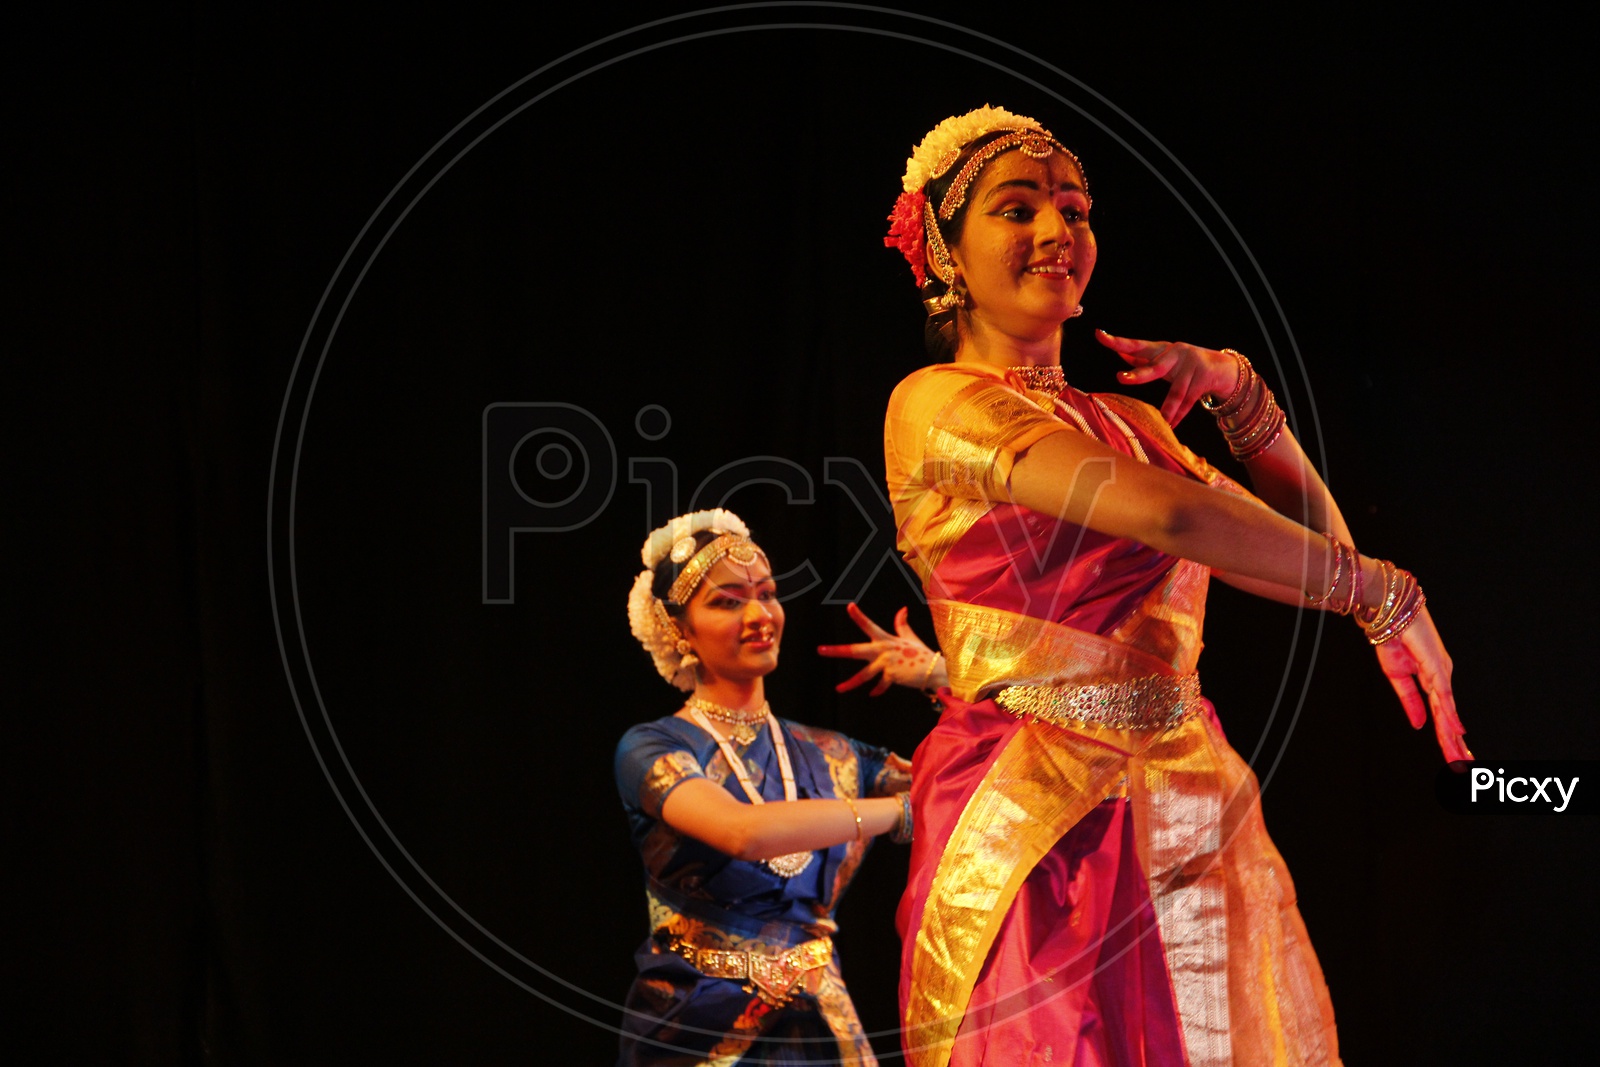 Indian Classical Dancers Performing a Classic Dance Art form